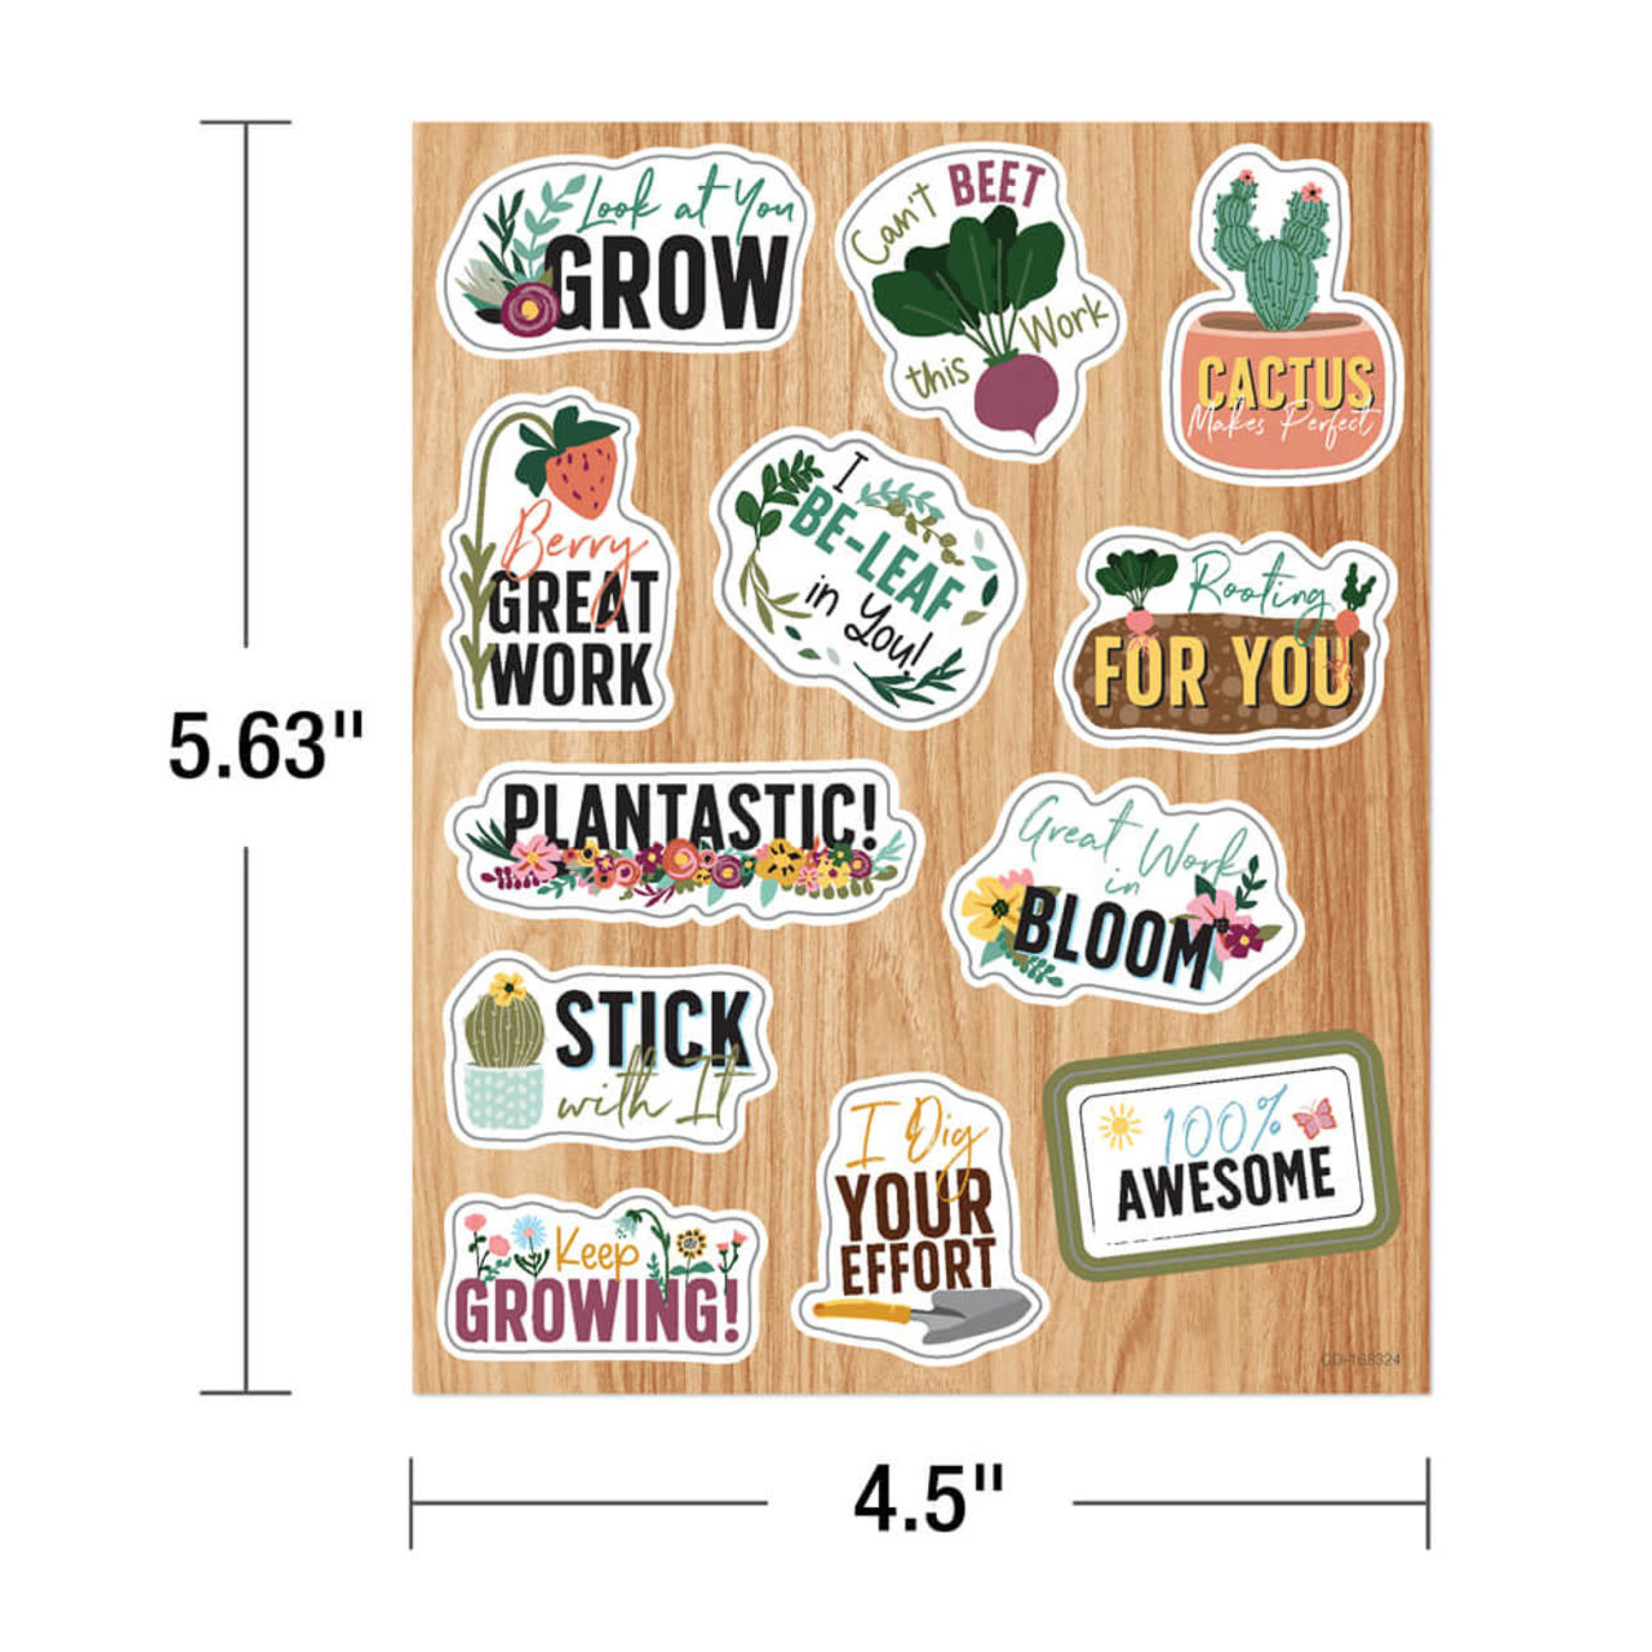 CARSON DELLOSA PUBLISHING CO Grow Together Motivational Shape Stickers